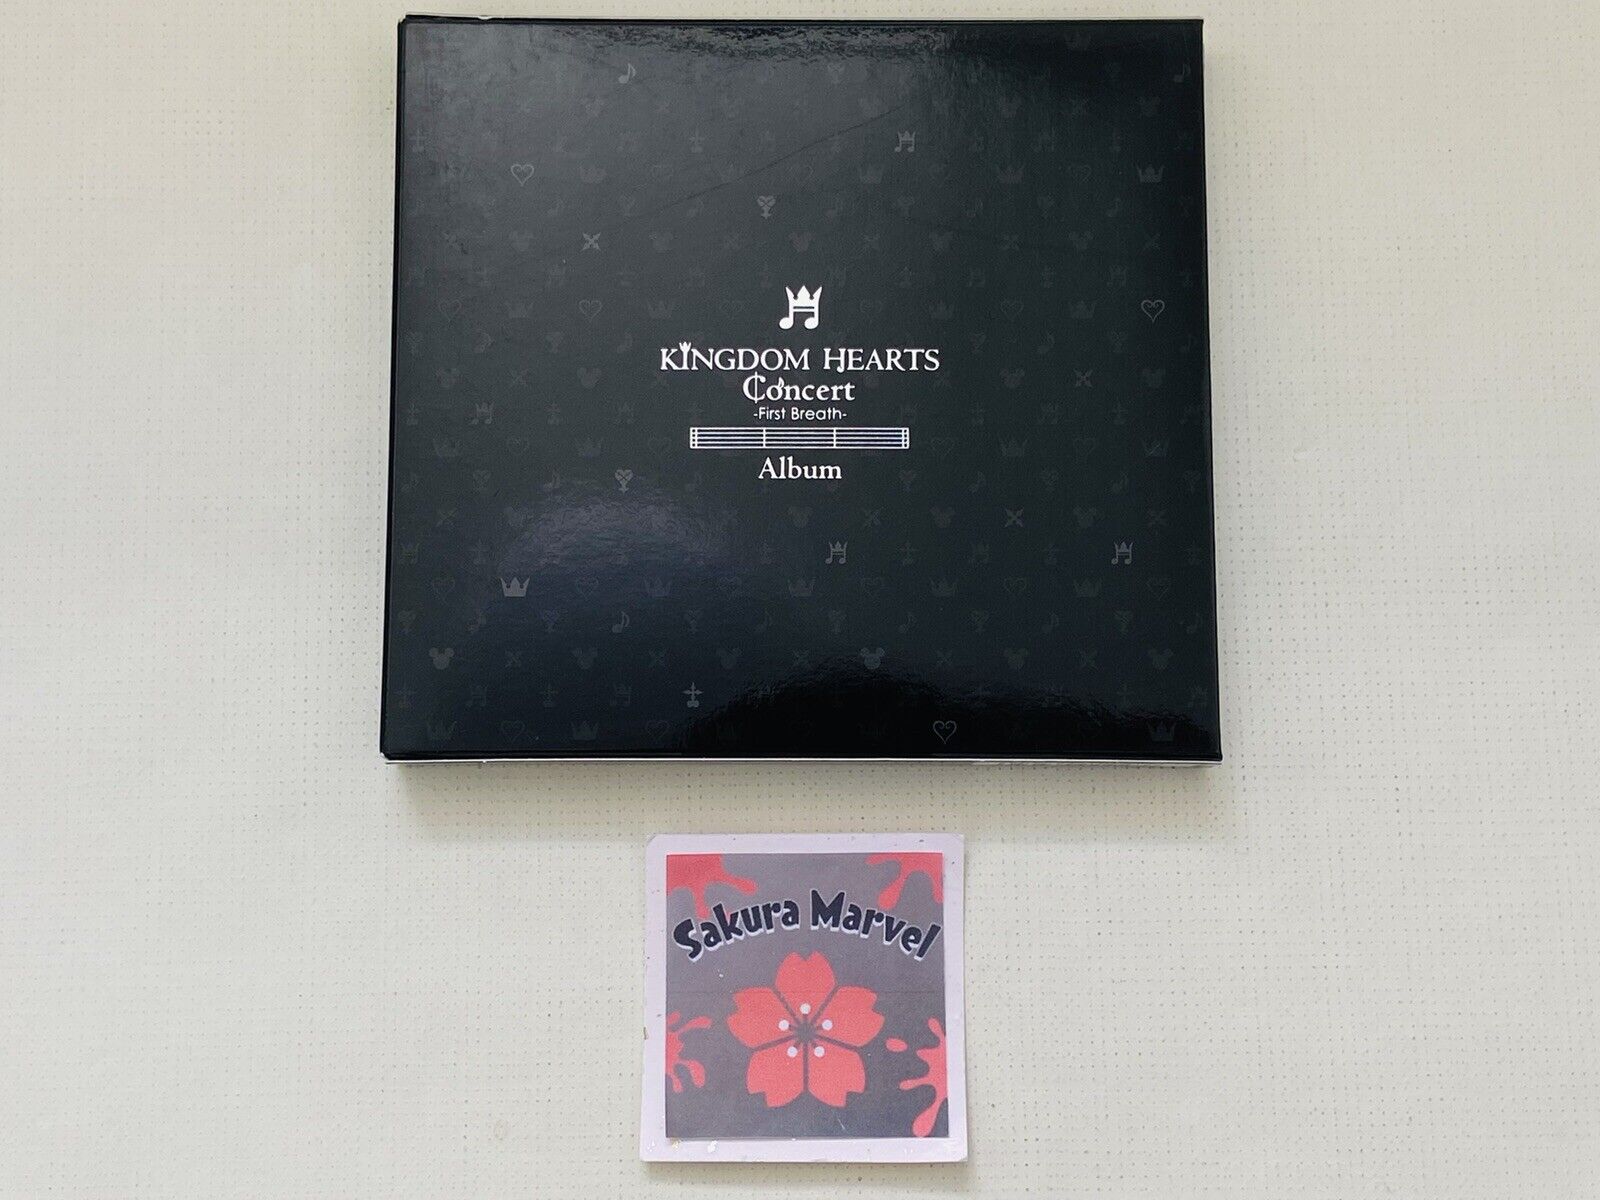 Kingdom Hearts Concert First Breath Square Enix Japanese Game CD Tested Music JP